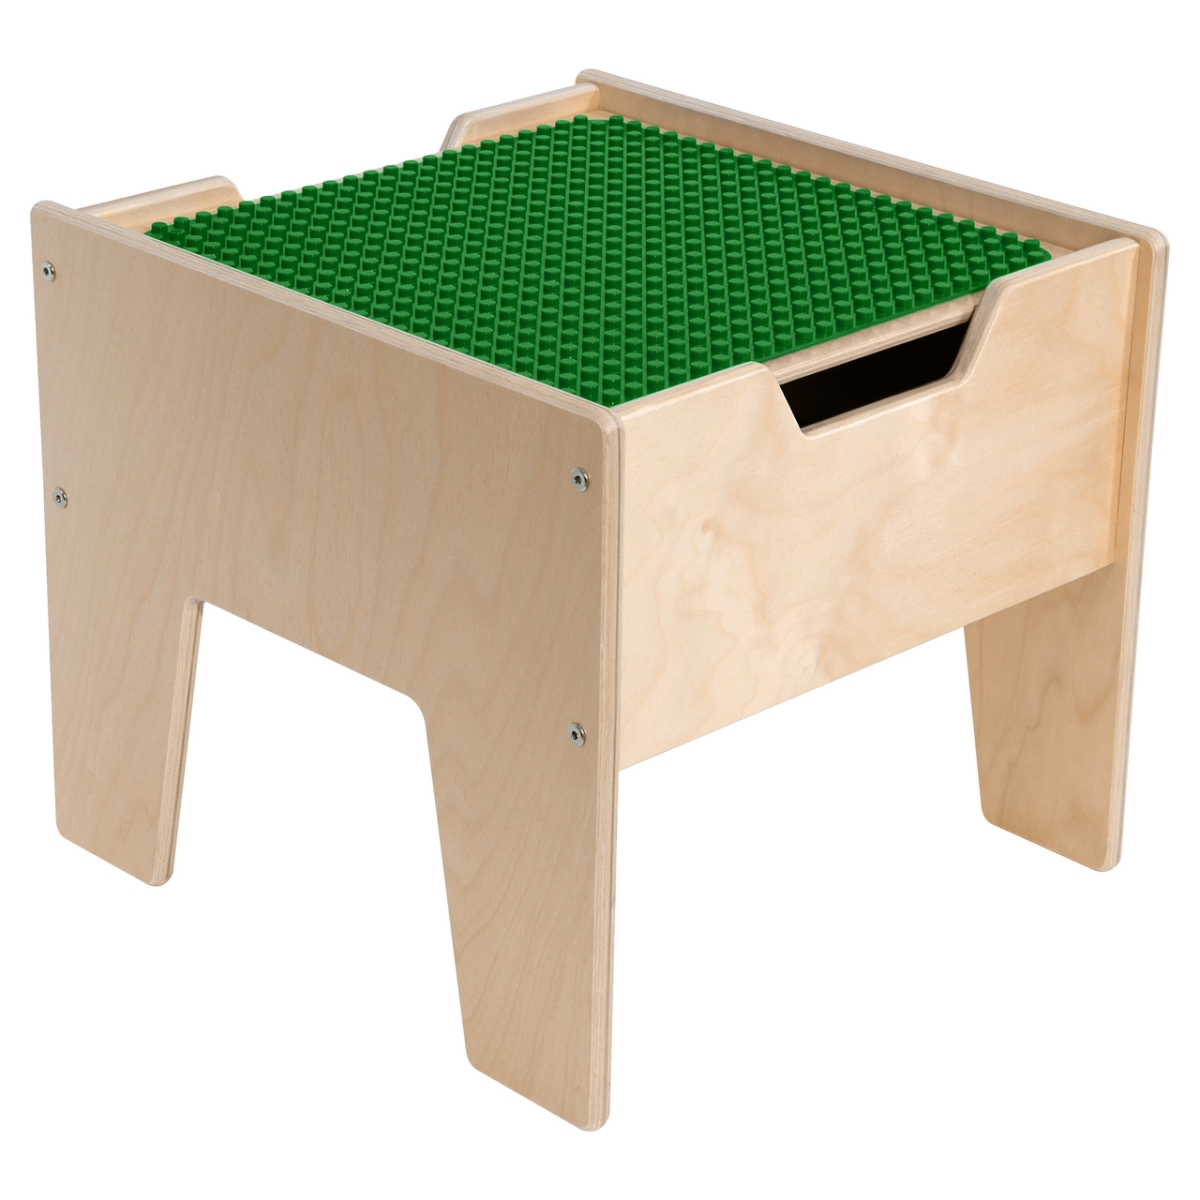 C991300f-pg 2-n-1 Activity Table With Green Duplo Compatible Top - Assembled